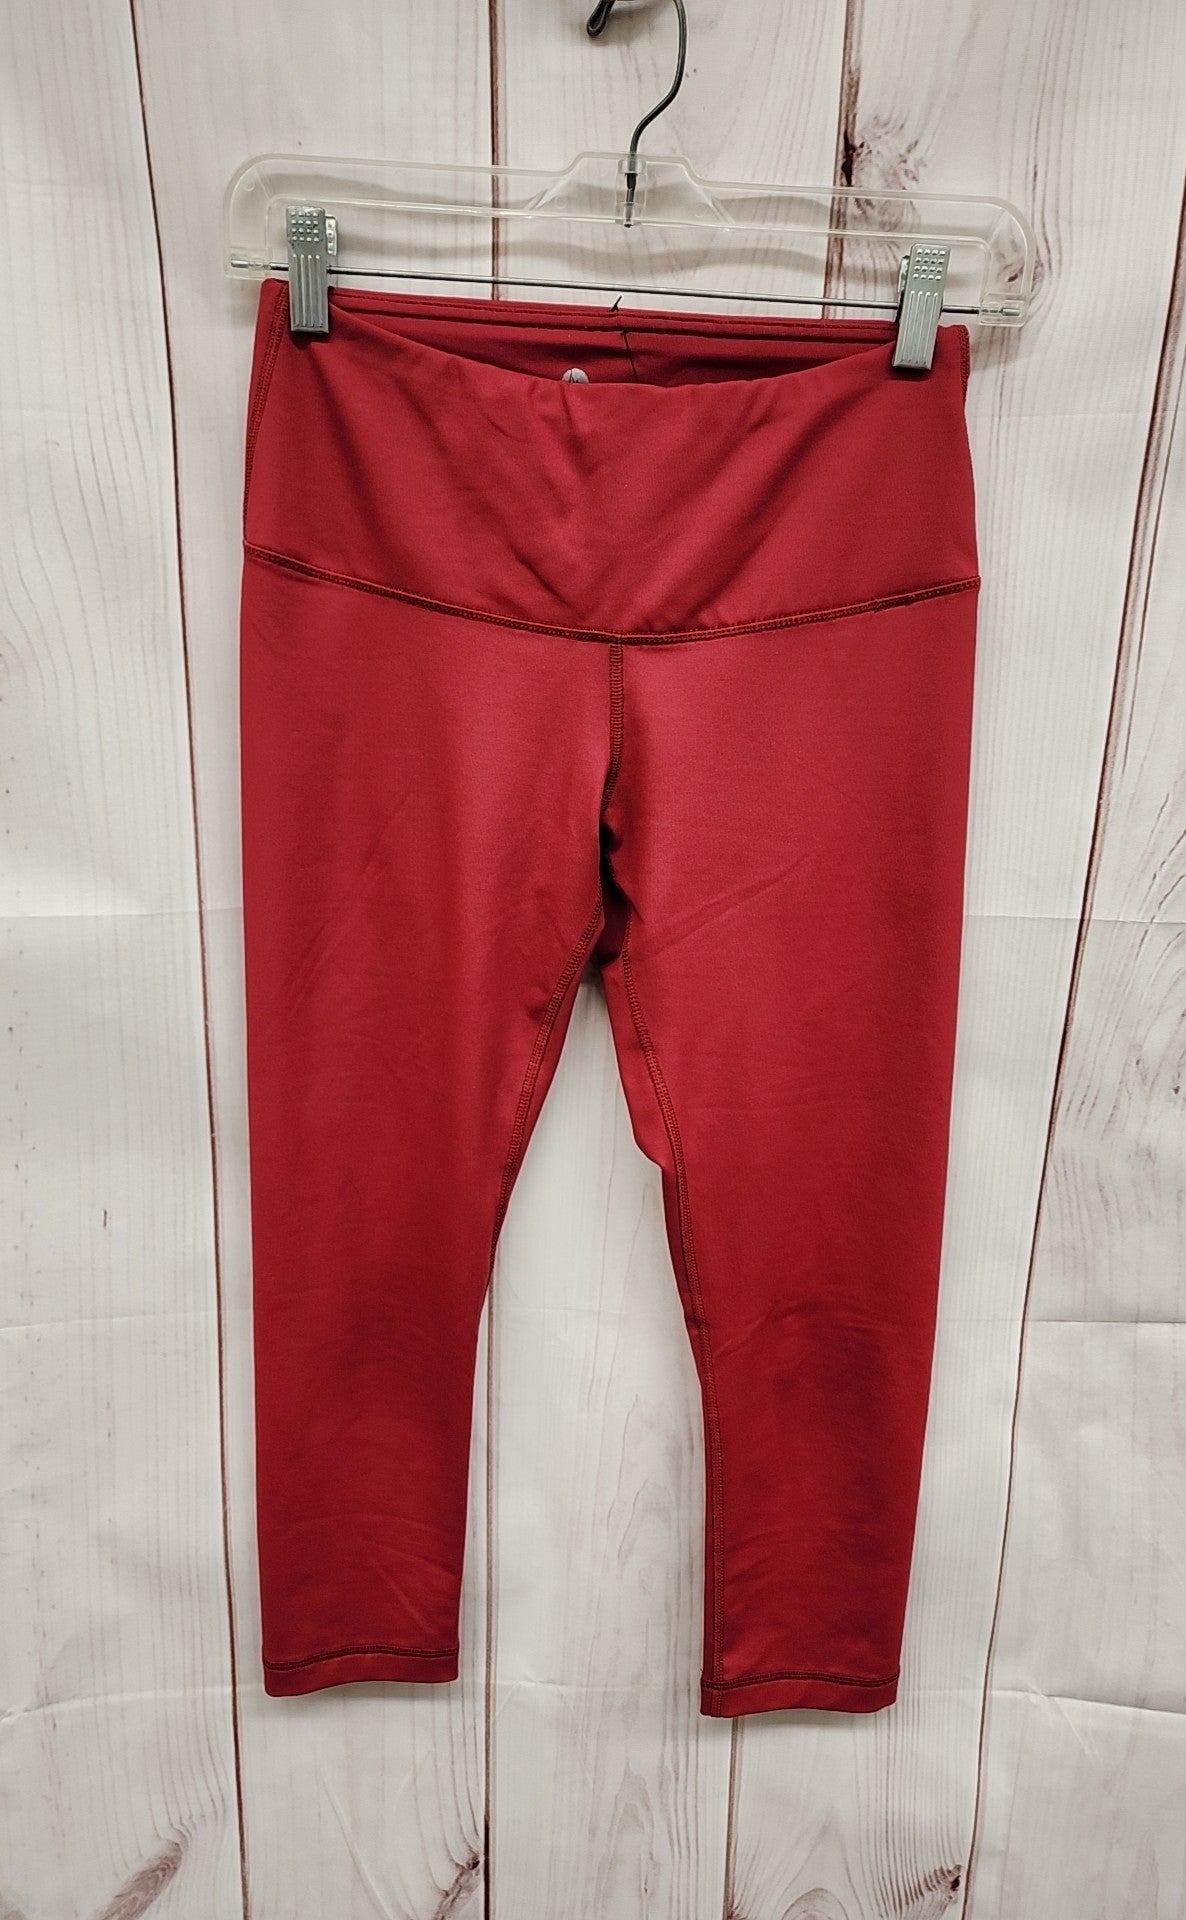 90 Degree Women's Size S Red Active Capris